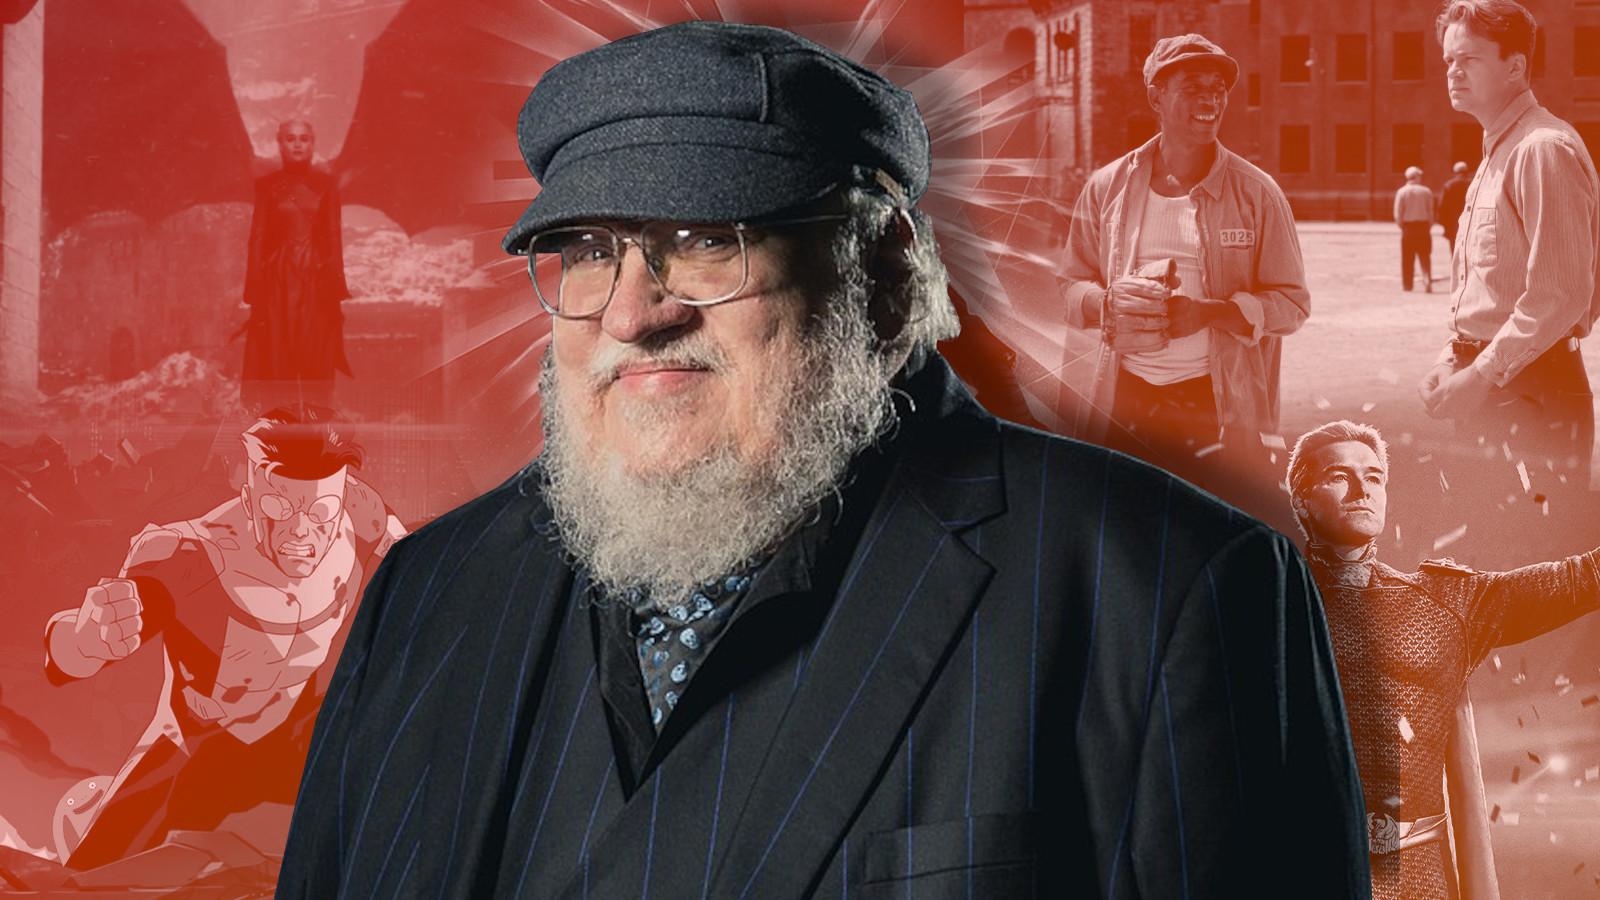 George RR Martin the creator of Game of Throne